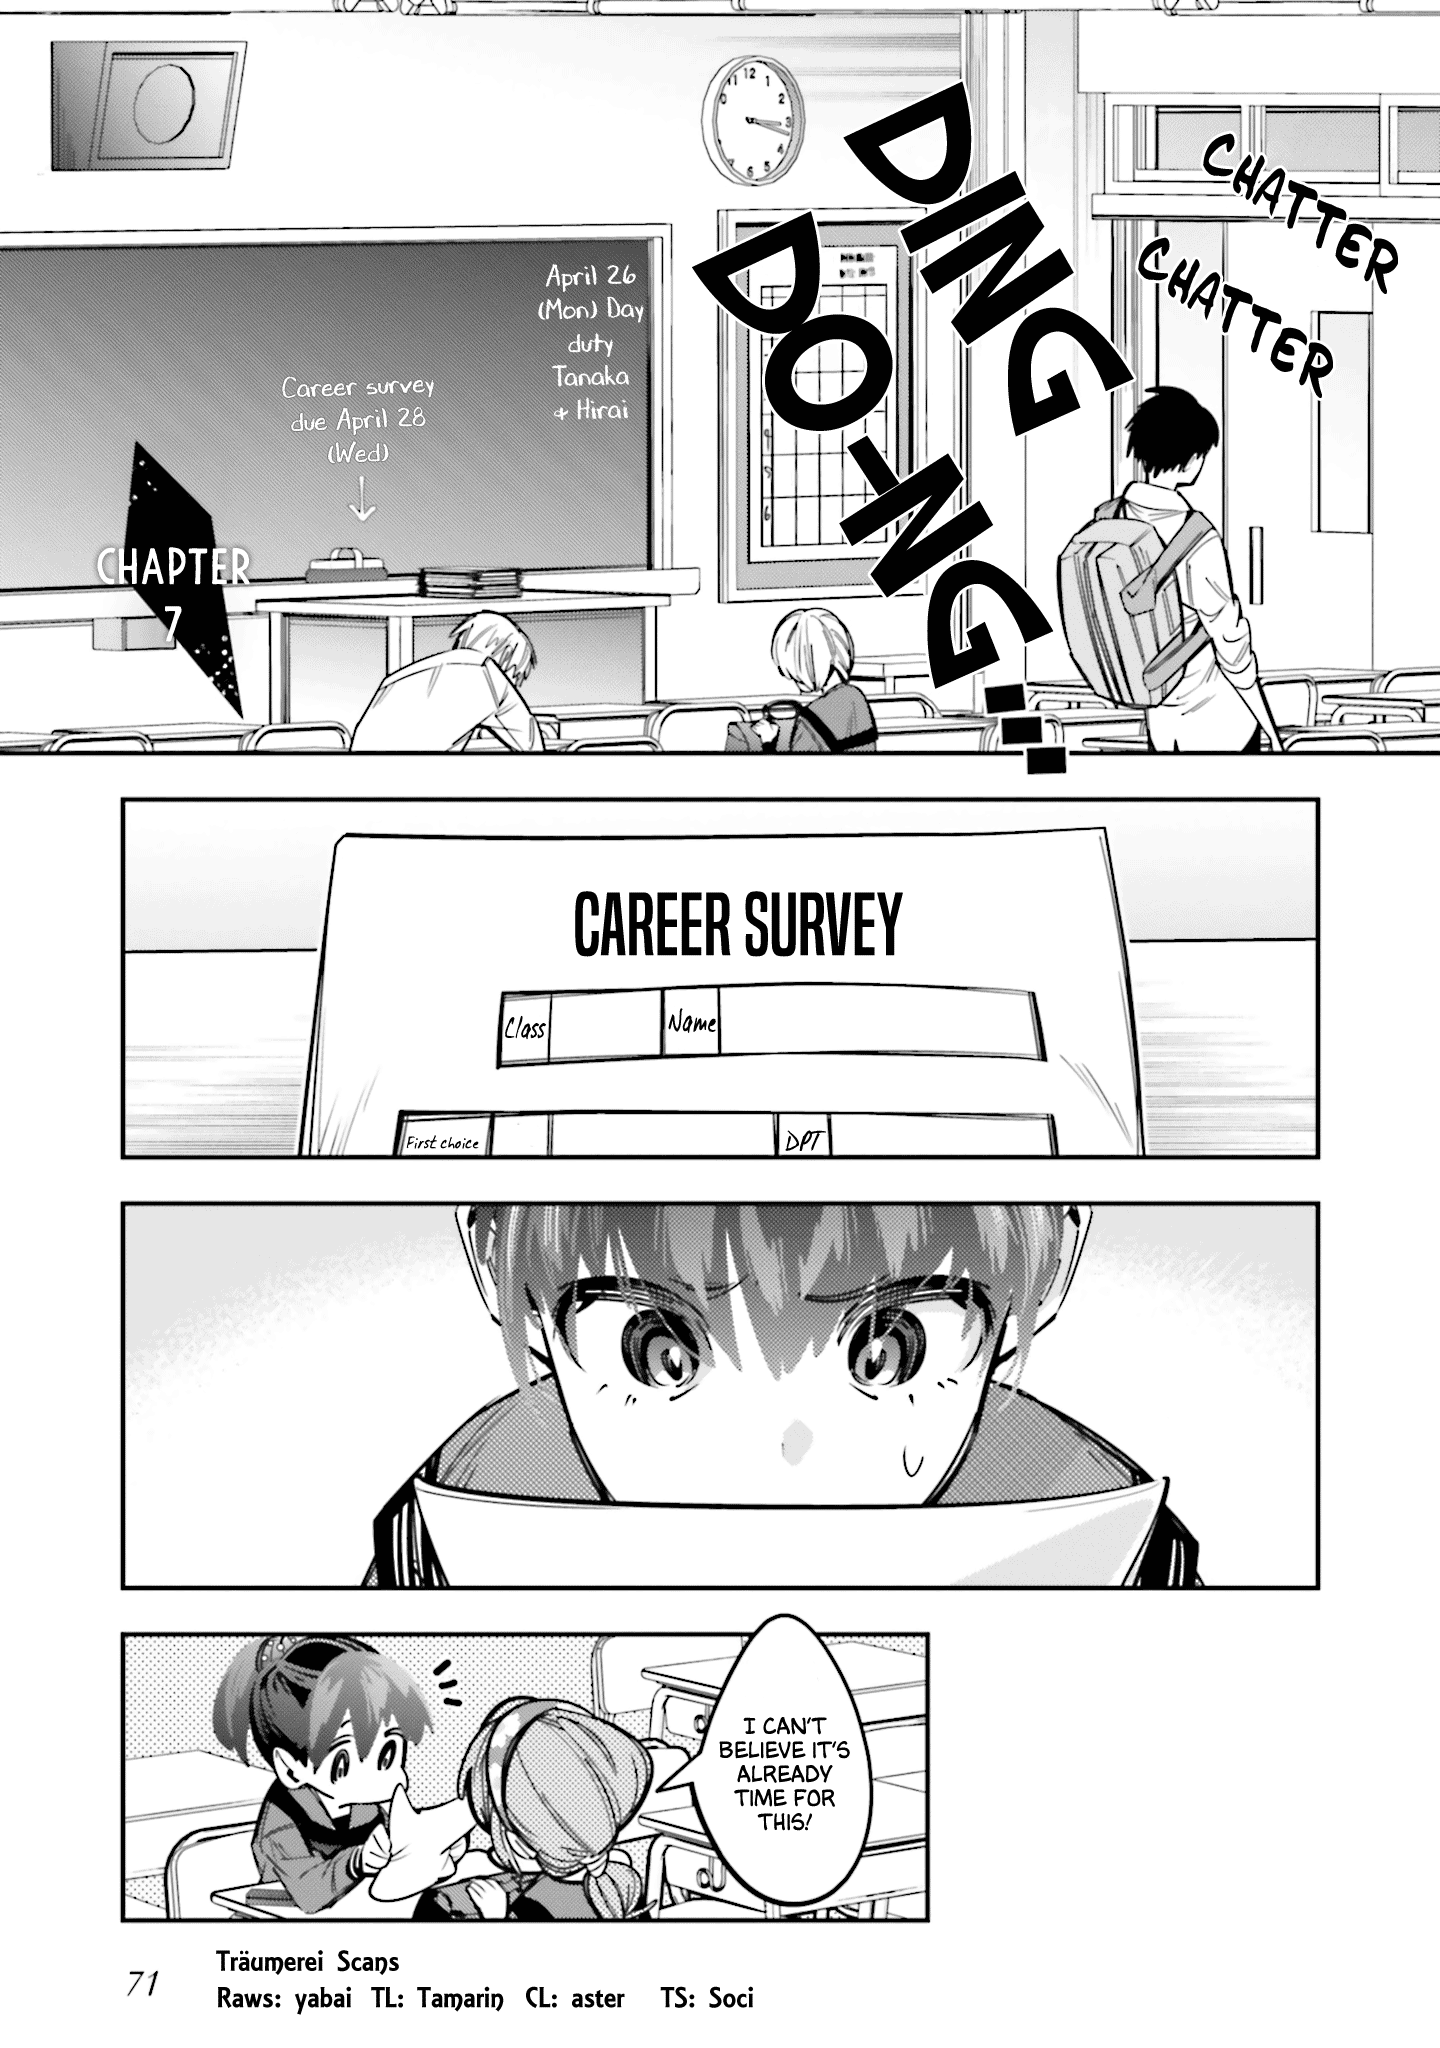 I Reincarnated As The Little Sister Of A Death Game Manga's Murder Mastermind And Failed - Page 1